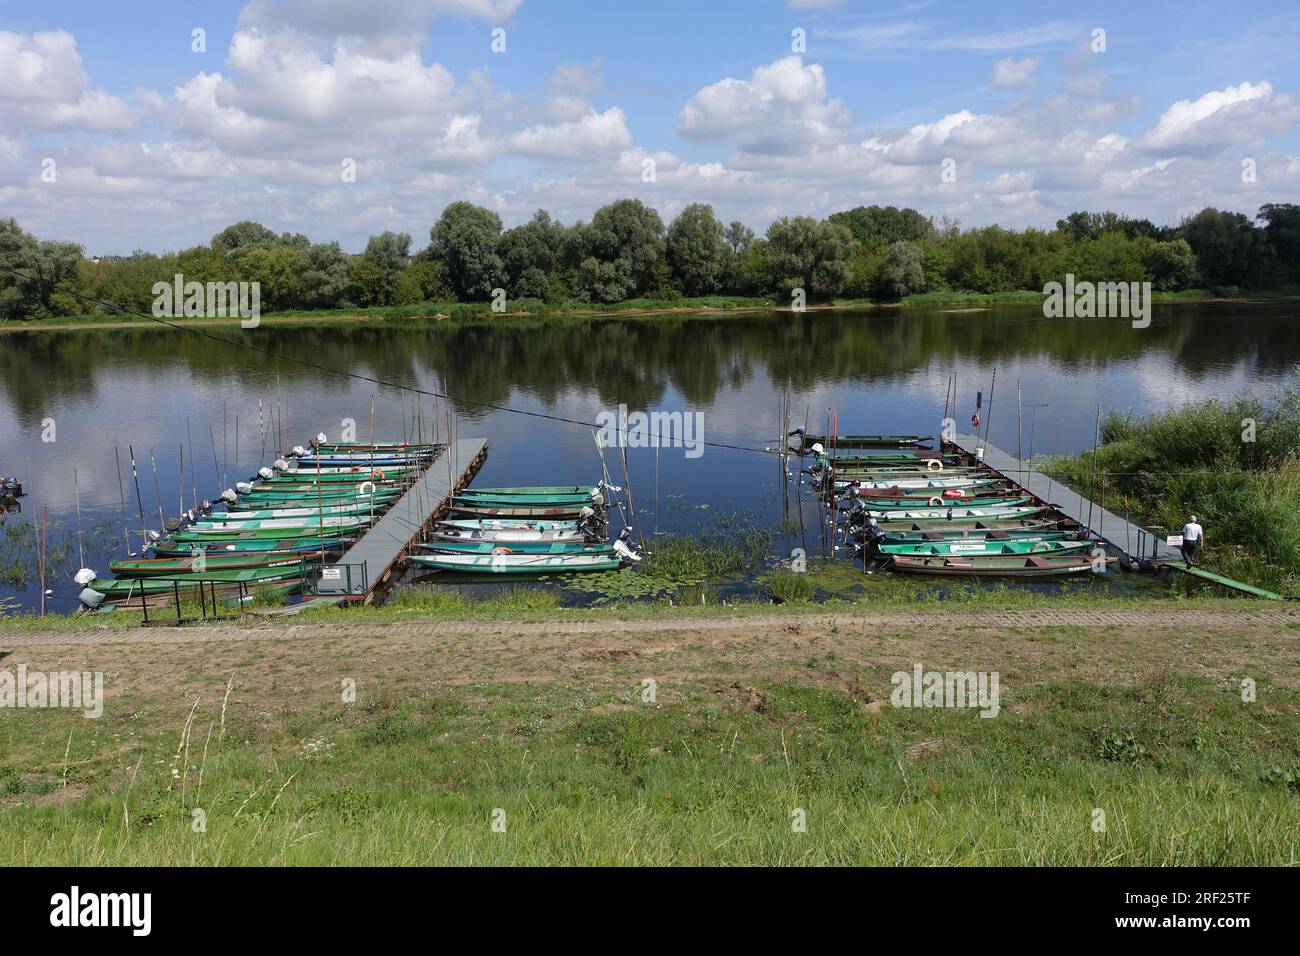 Fishing boats in the small river port of Nowy Dwor Mazowiecki, Poland, on the Narew River Stock Photo